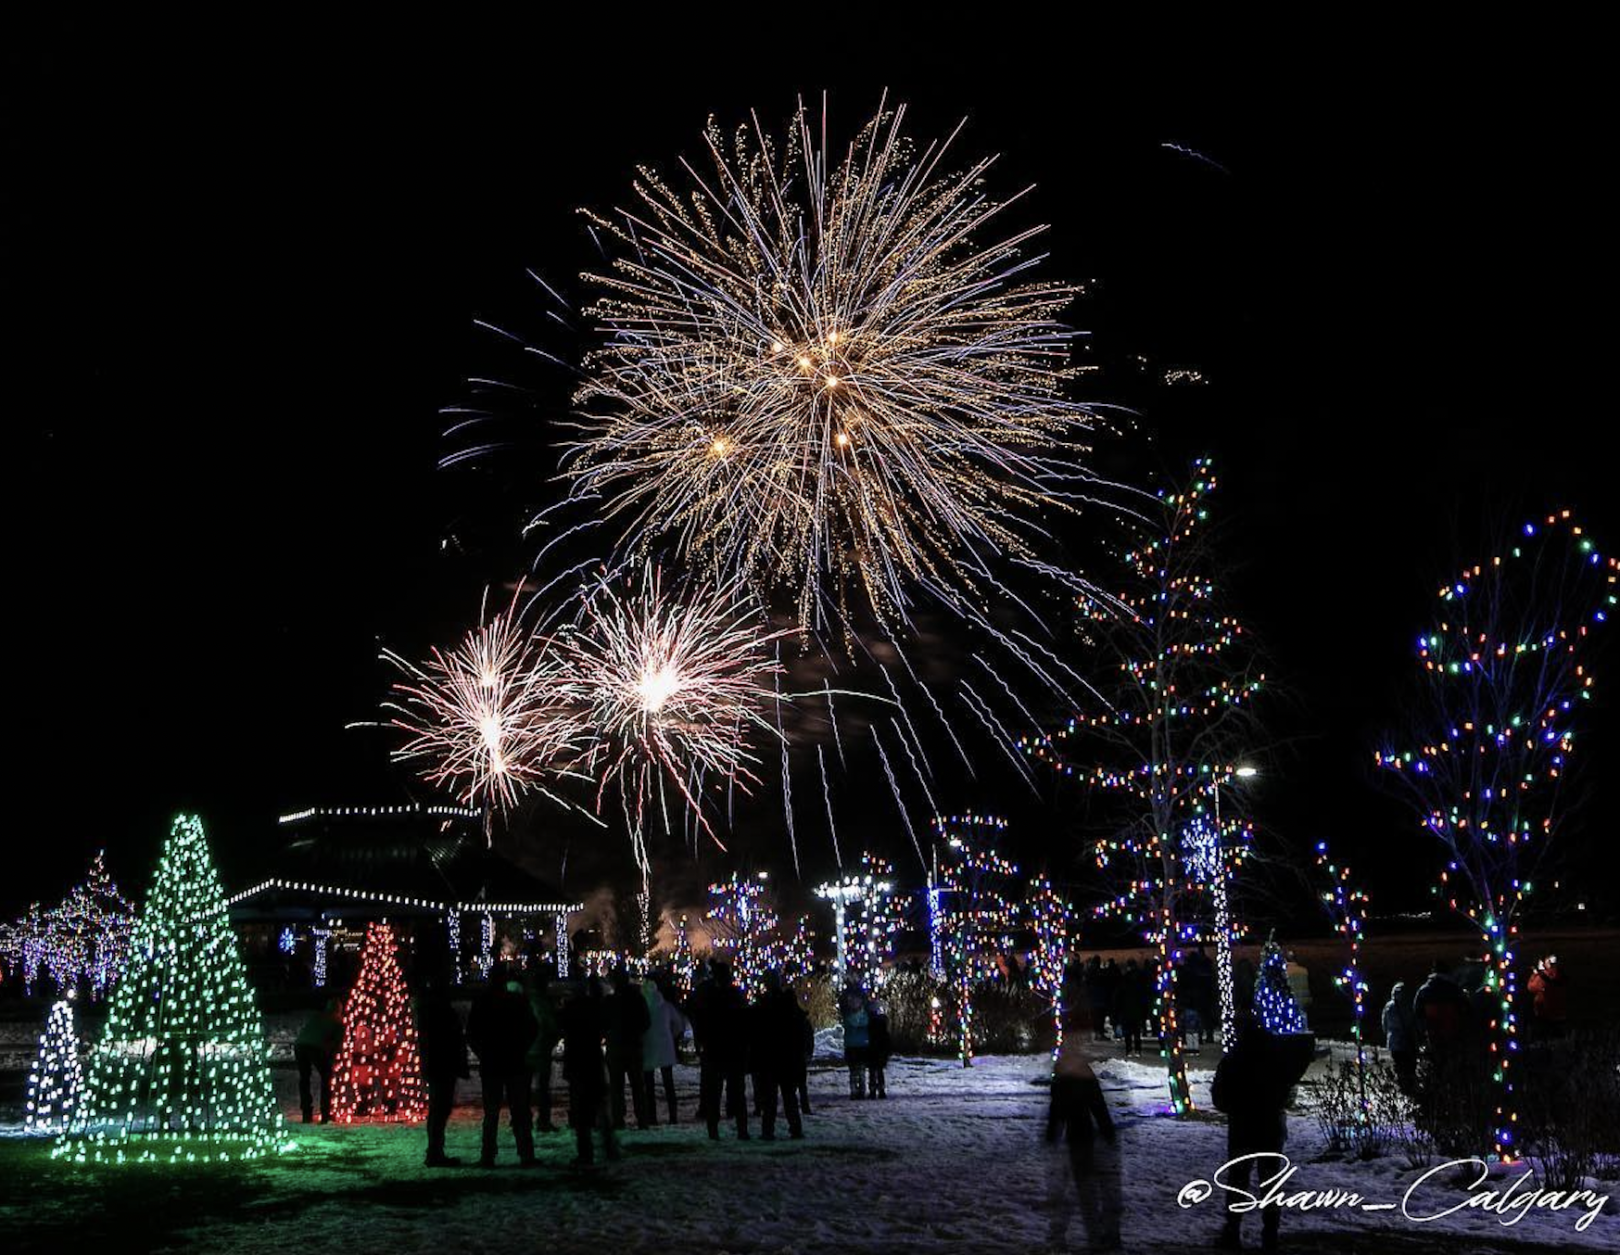 Winters Lights Festival kicks off holiday season in Chestermere